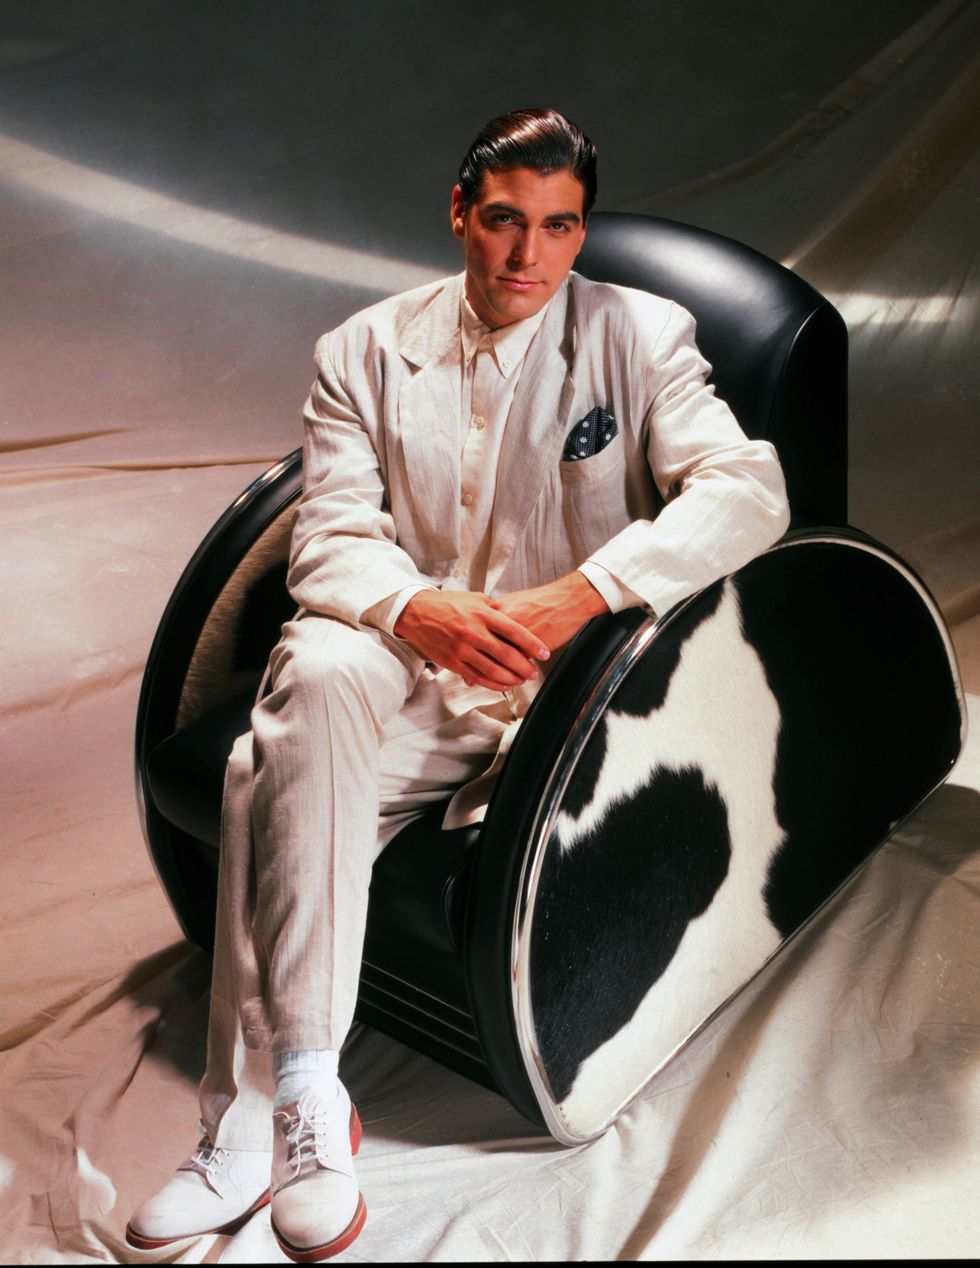 los angeles   march 2 actor, director and producer george clooney poses for a portrait session on march 2, 1992 in los angeles, california photo by harry langdongetty images